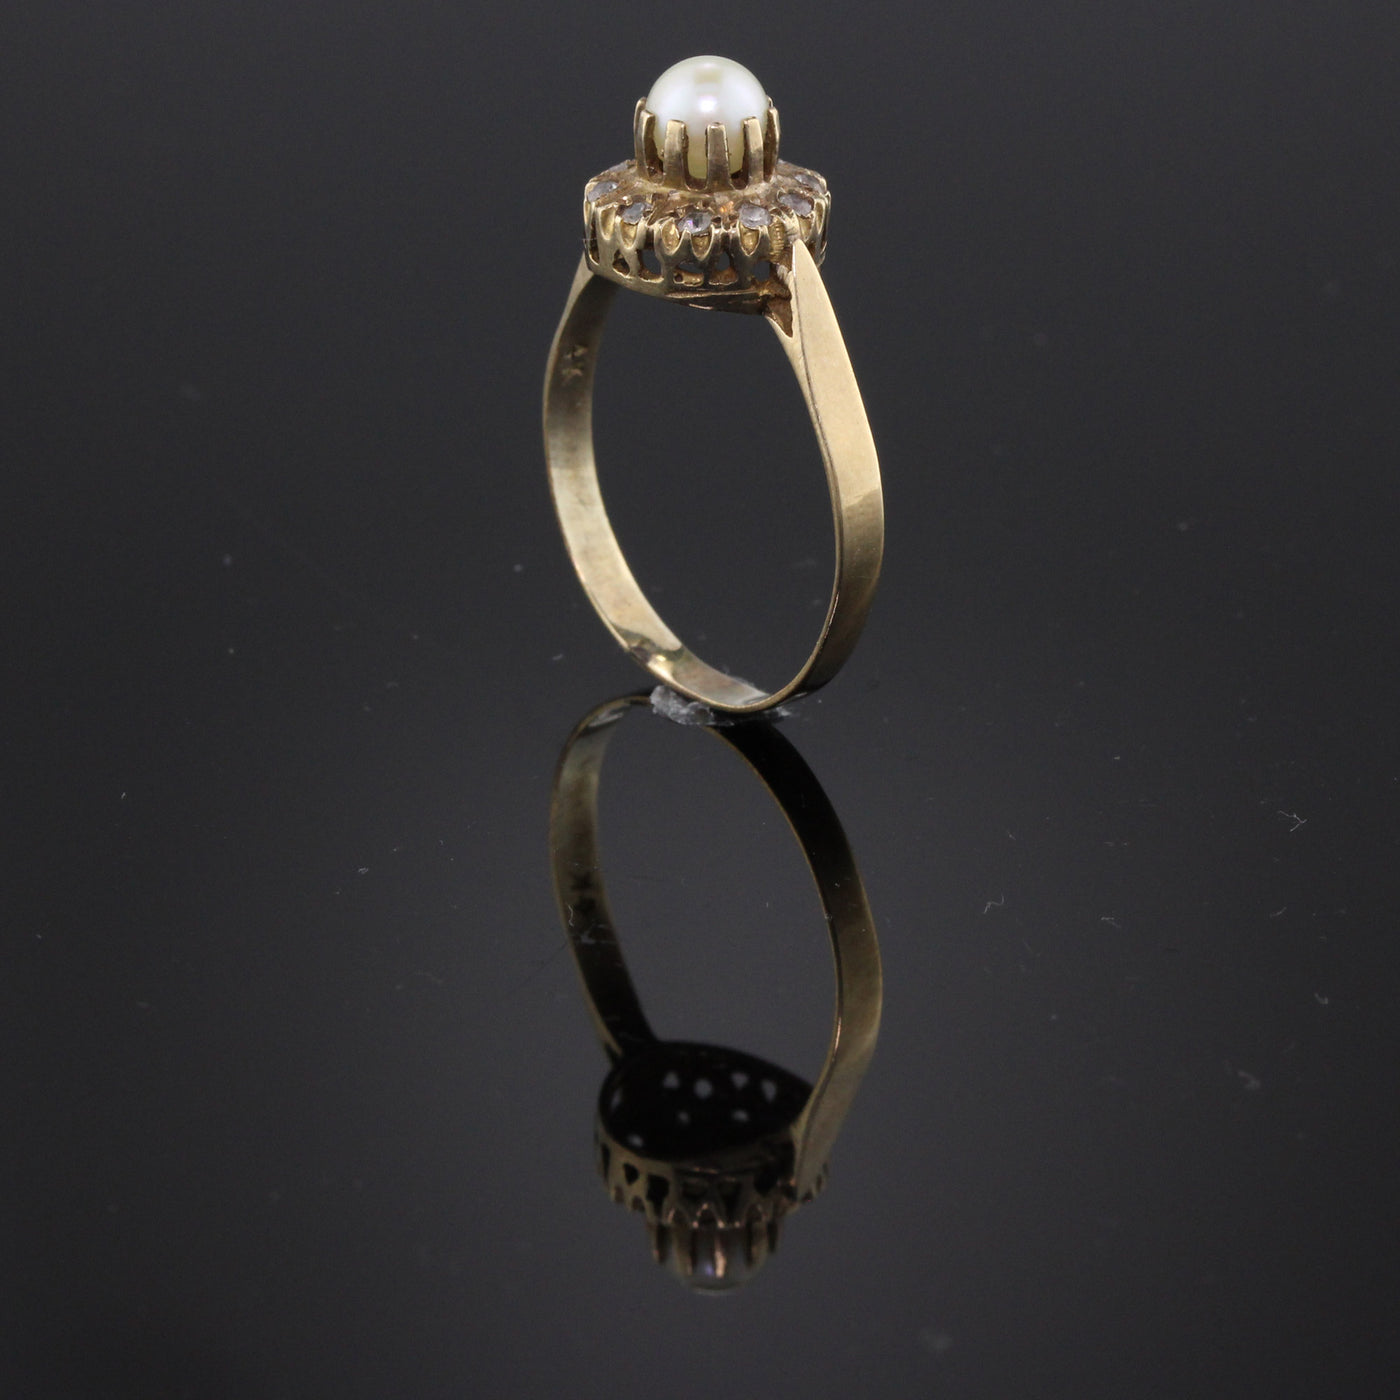 Antique Georgian 14K Yellow Gold Pearl & Paste Cluster Ring - The Antique Parlour